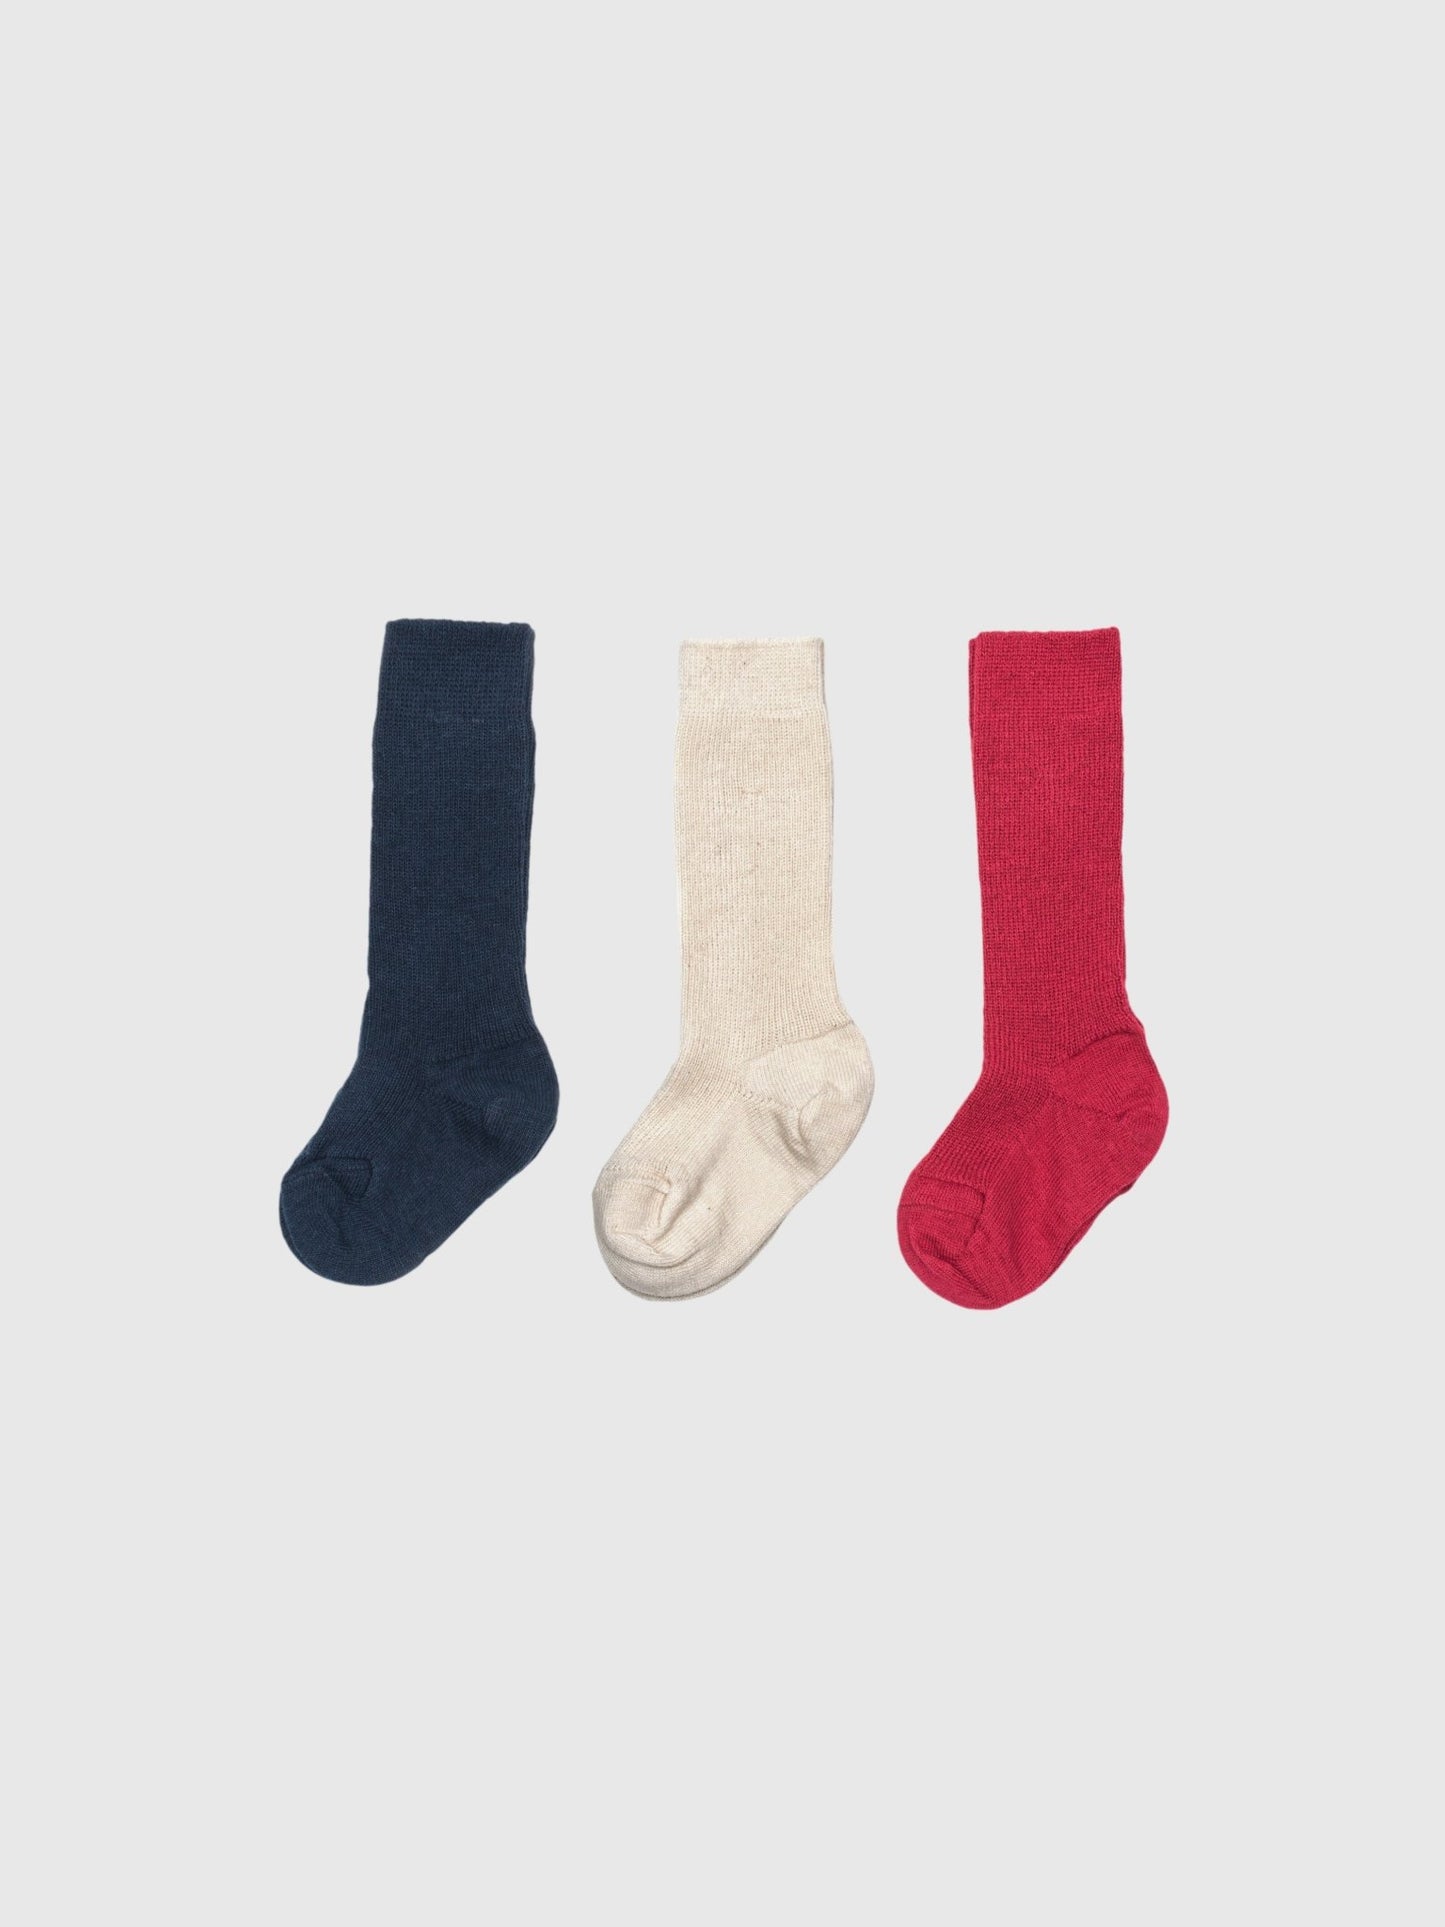 organic merino wool and cotton knee socks - natural, red and navy - LILA.US